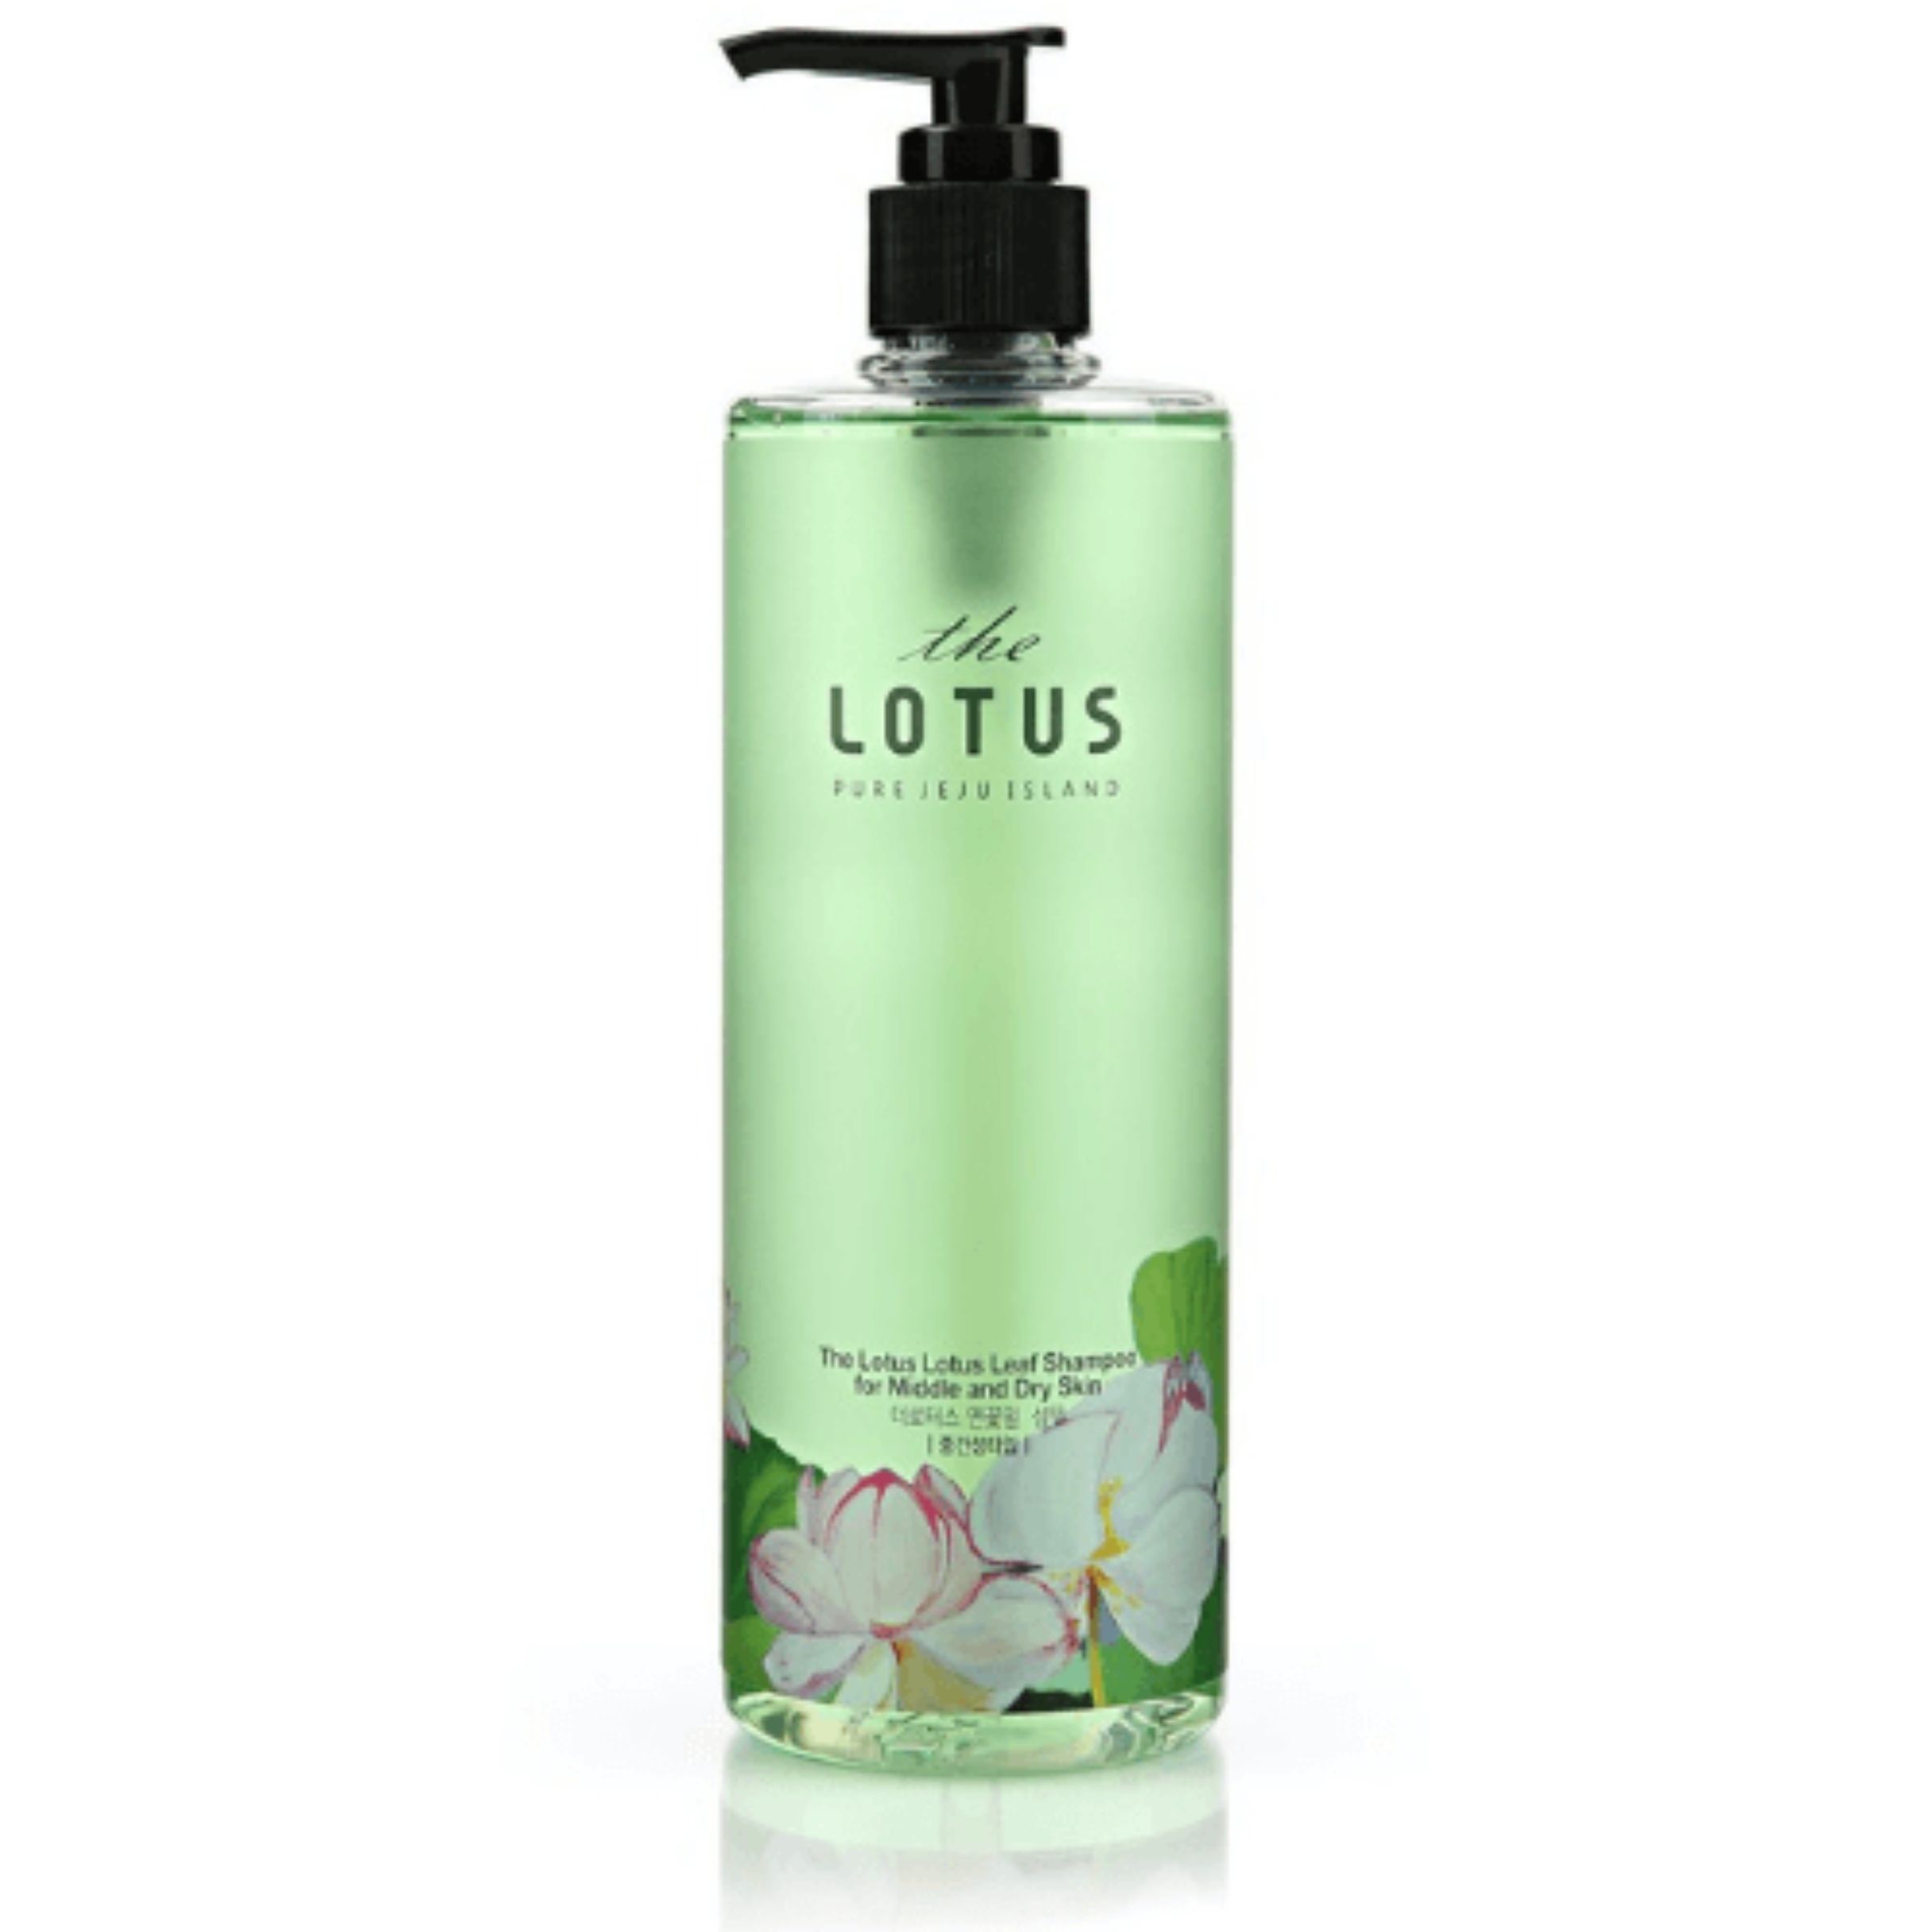 INACTIVATE NO LONGER SOLD: The Lotus - Jeju Lotus Leaf Shampoo (Normal / Dry Skin)